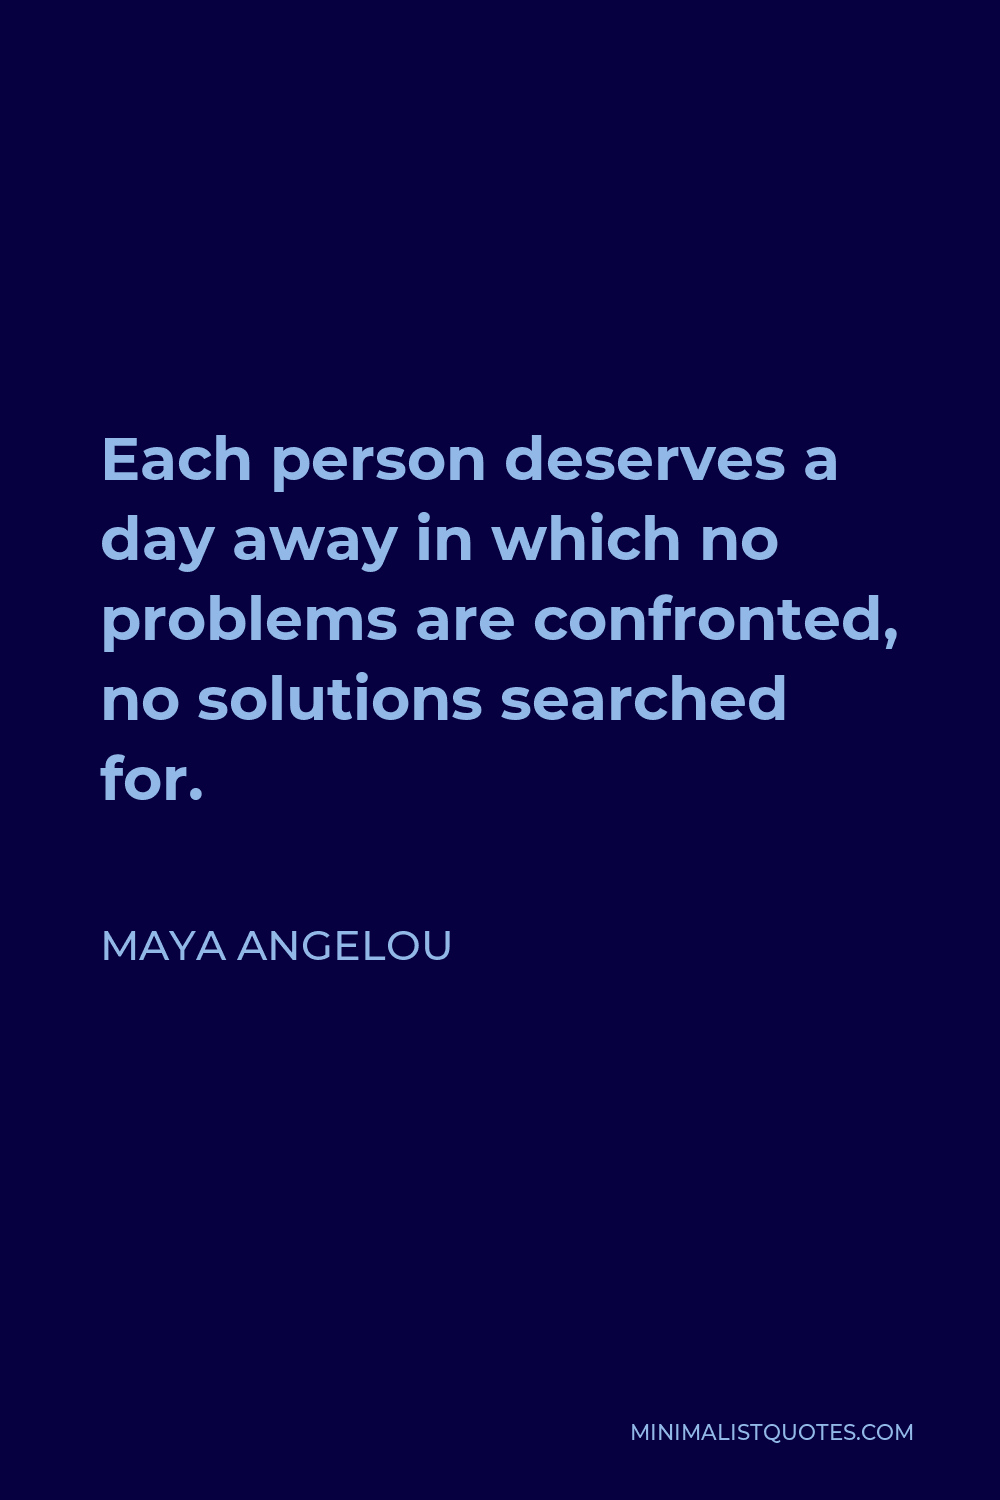 Maya Angelou Quote - Each person deserves a day away in which no problems are confronted, no solutions searched for.